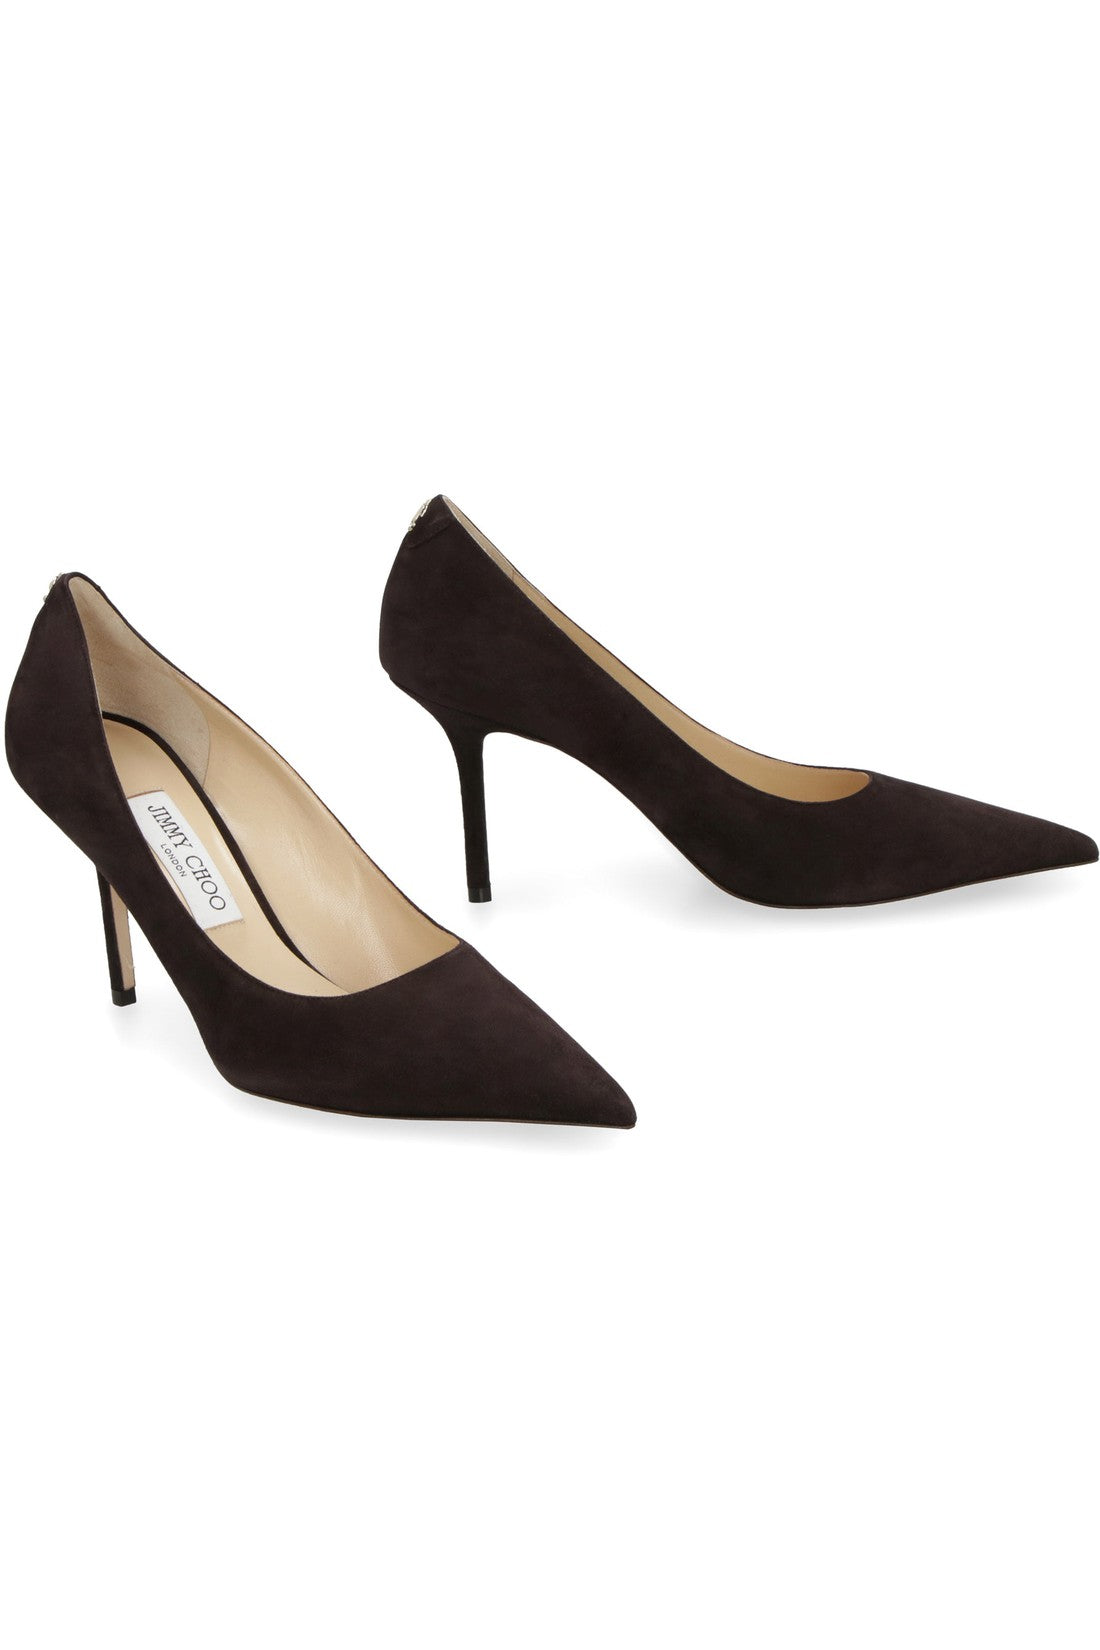 Jimmy Choo-OUTLET-SALE-Love 85 suede pointy-toe pumps-ARCHIVIST